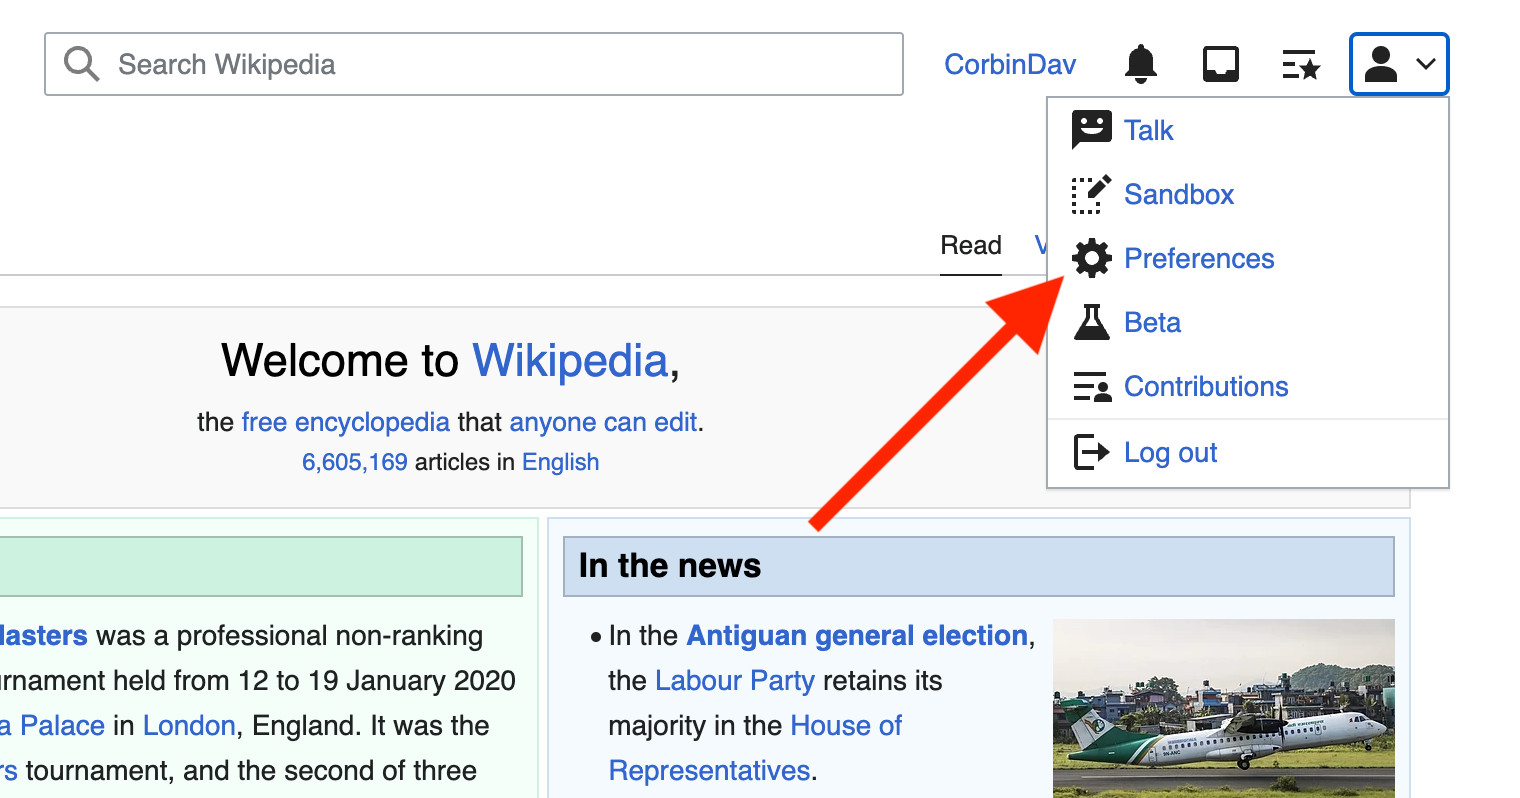 How to Get the Old Wikipedia Layout Back